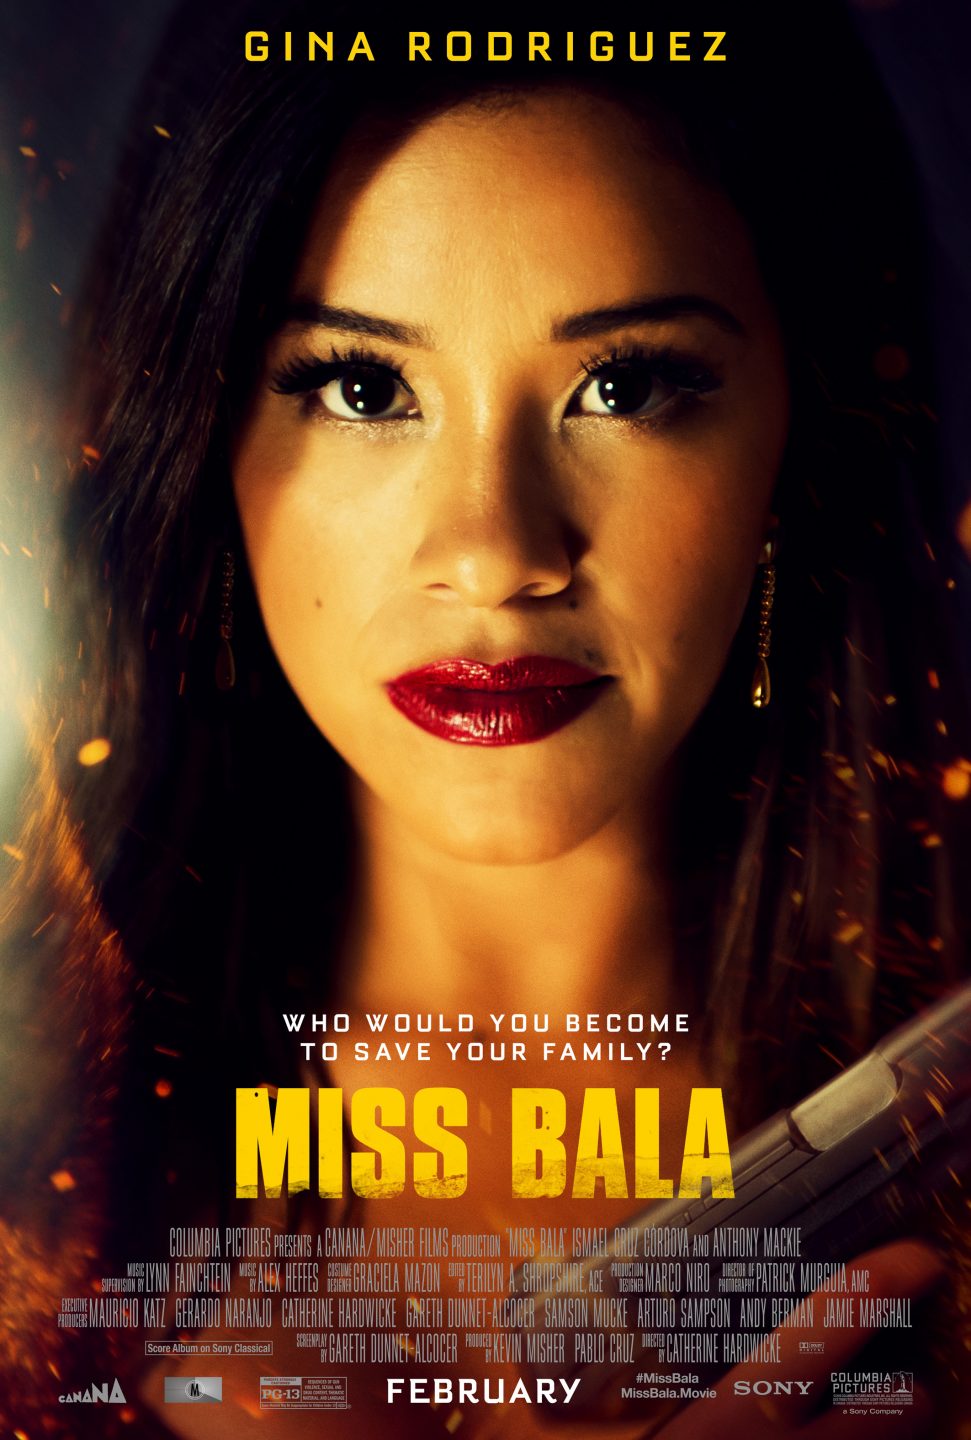 Miss Bala poster (Sony Pictures)